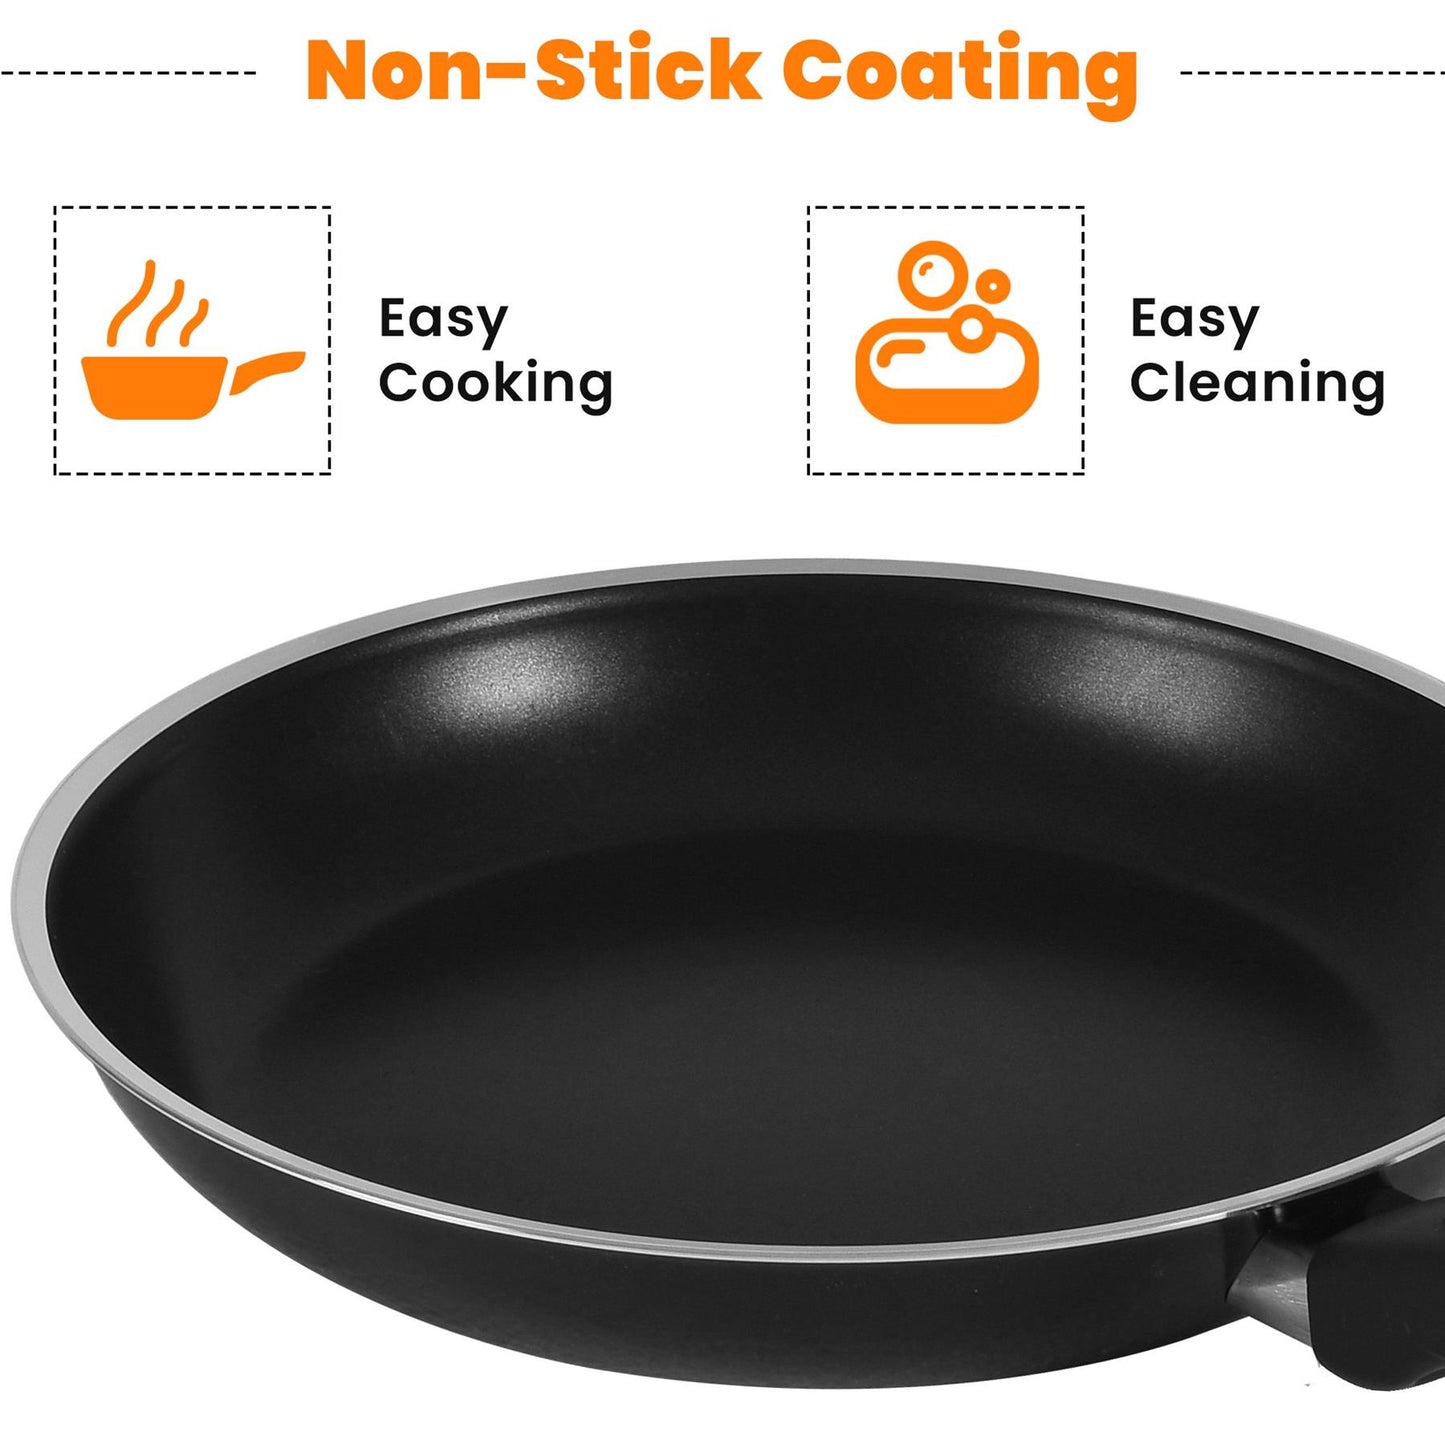 Non-Stick Frying Pans Set With Easy-Cook Non-Stick Coating For Lightweight Cooking